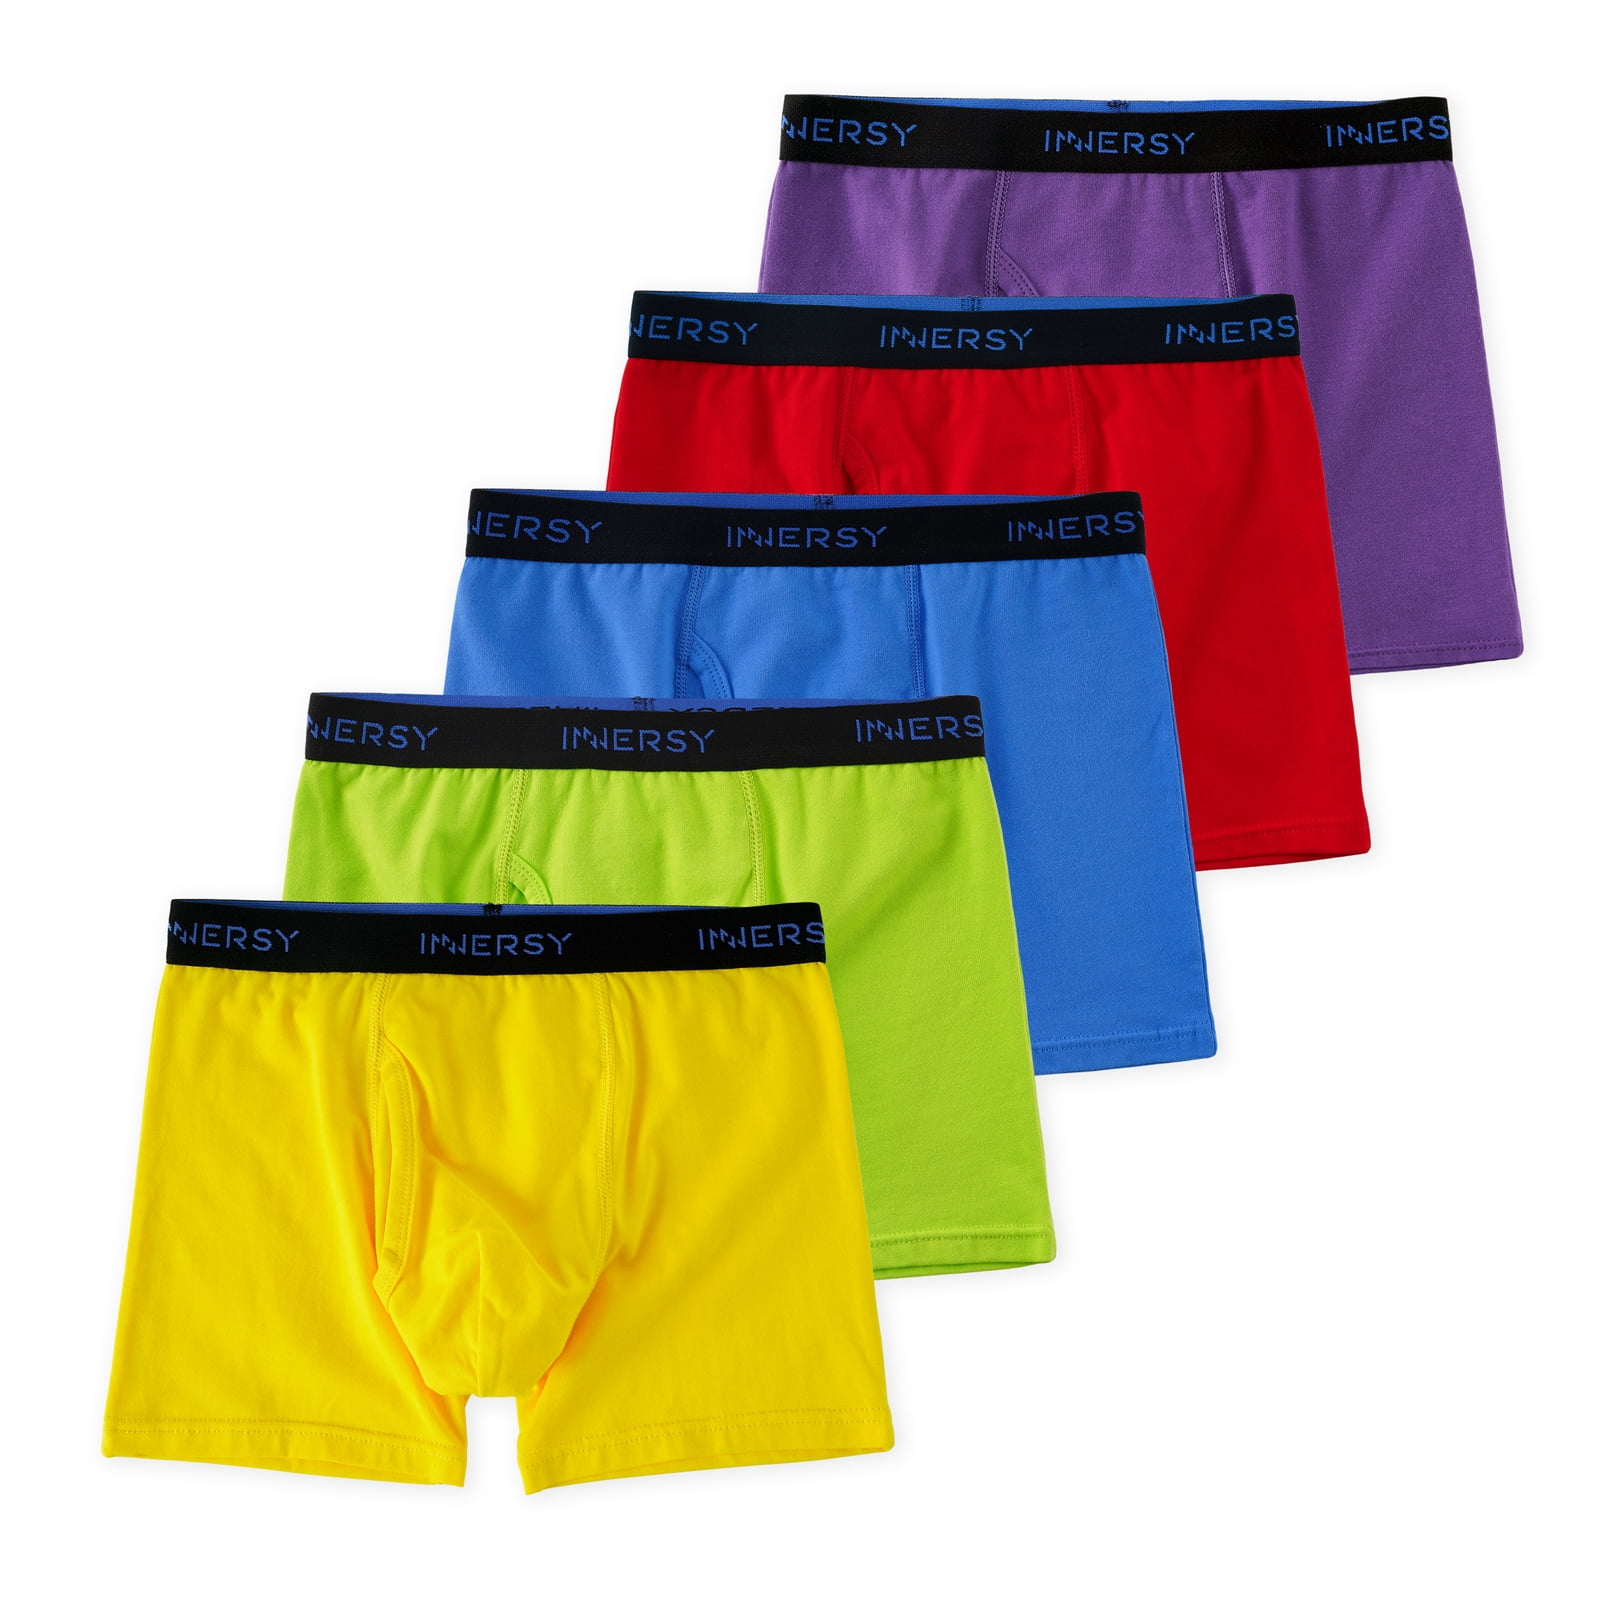 INNERSY Boys Underwear Stretchy Cotton Soft Boxer Briefs for 6-18 Teen Boys  5 Pack (L, Rainbow Colors) - Walmart.com